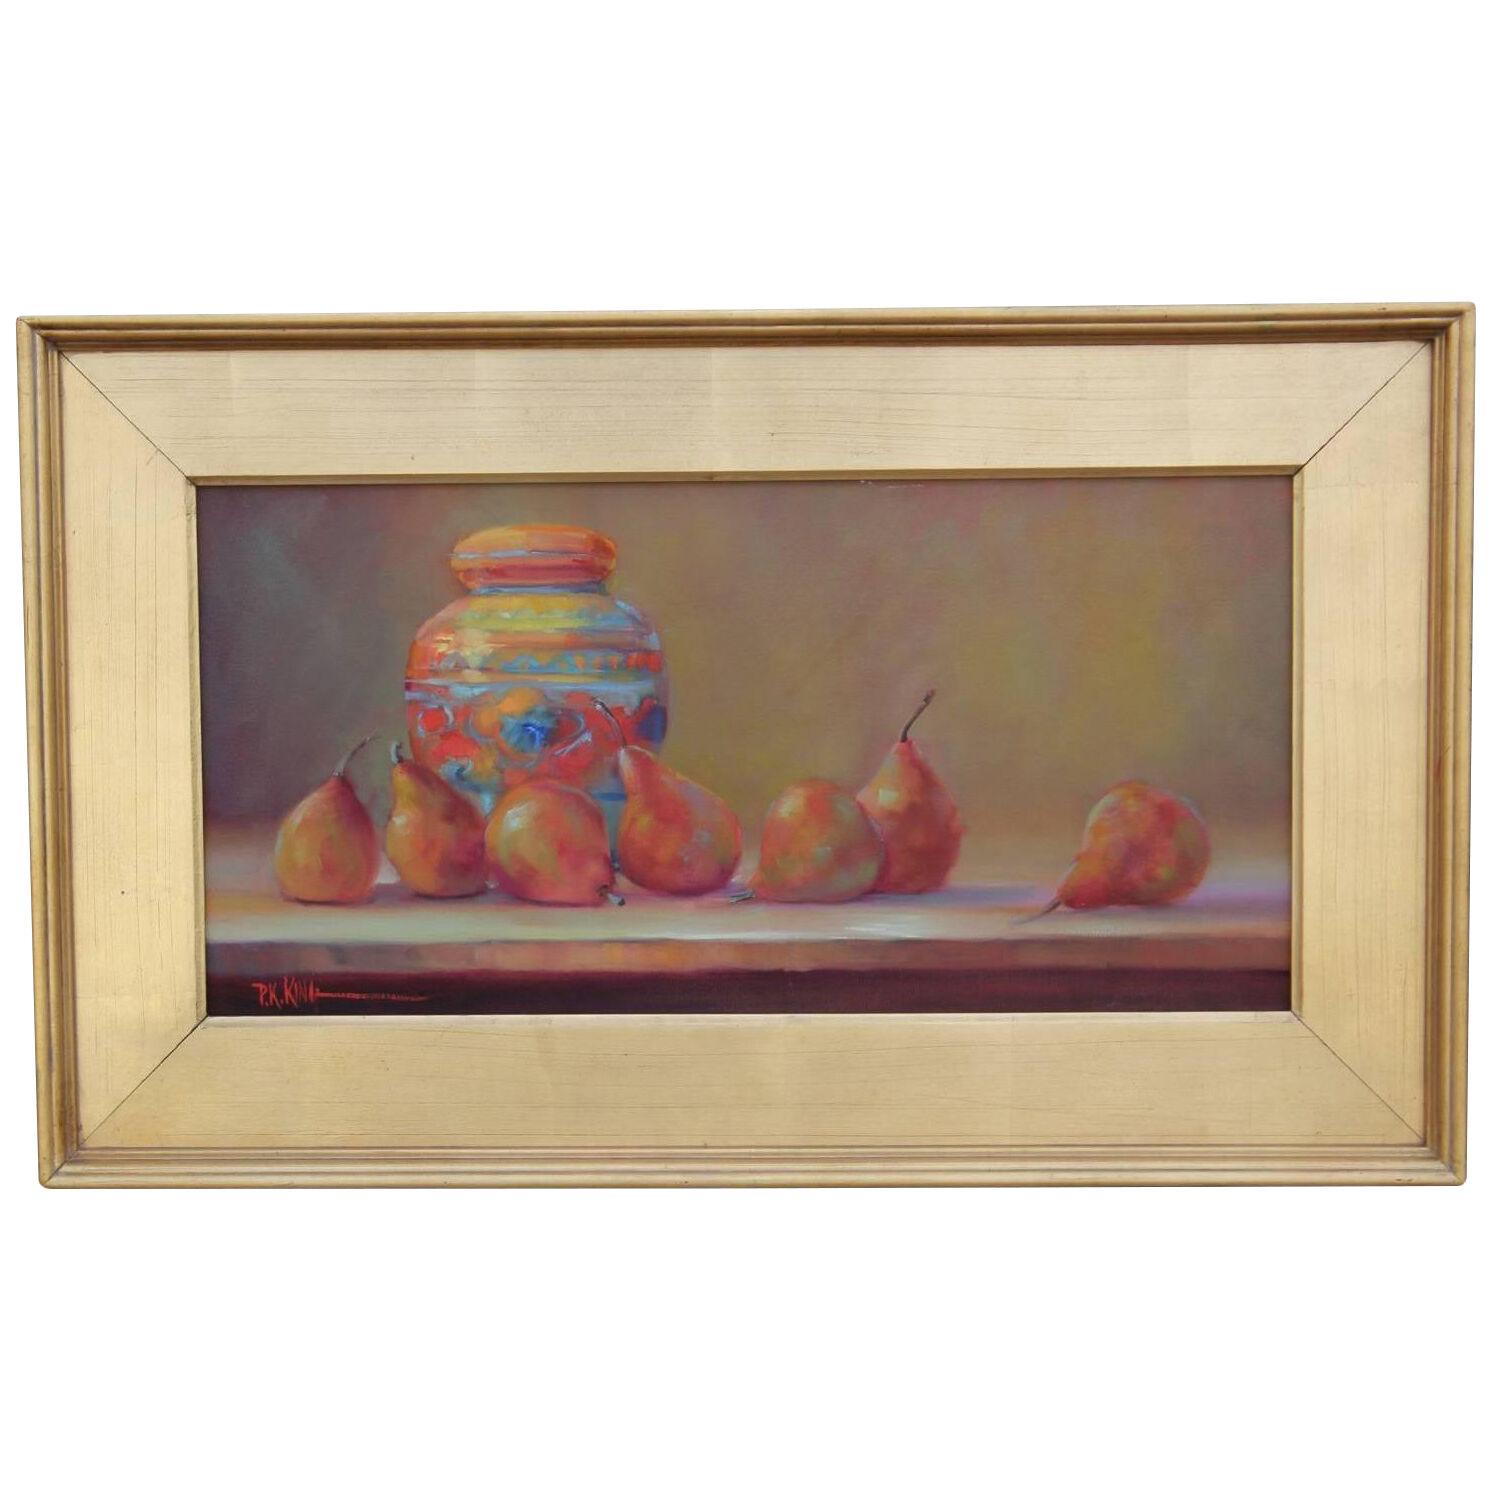 Vivid Impressionist Still Life Painting By P.K. King Late 20th Century